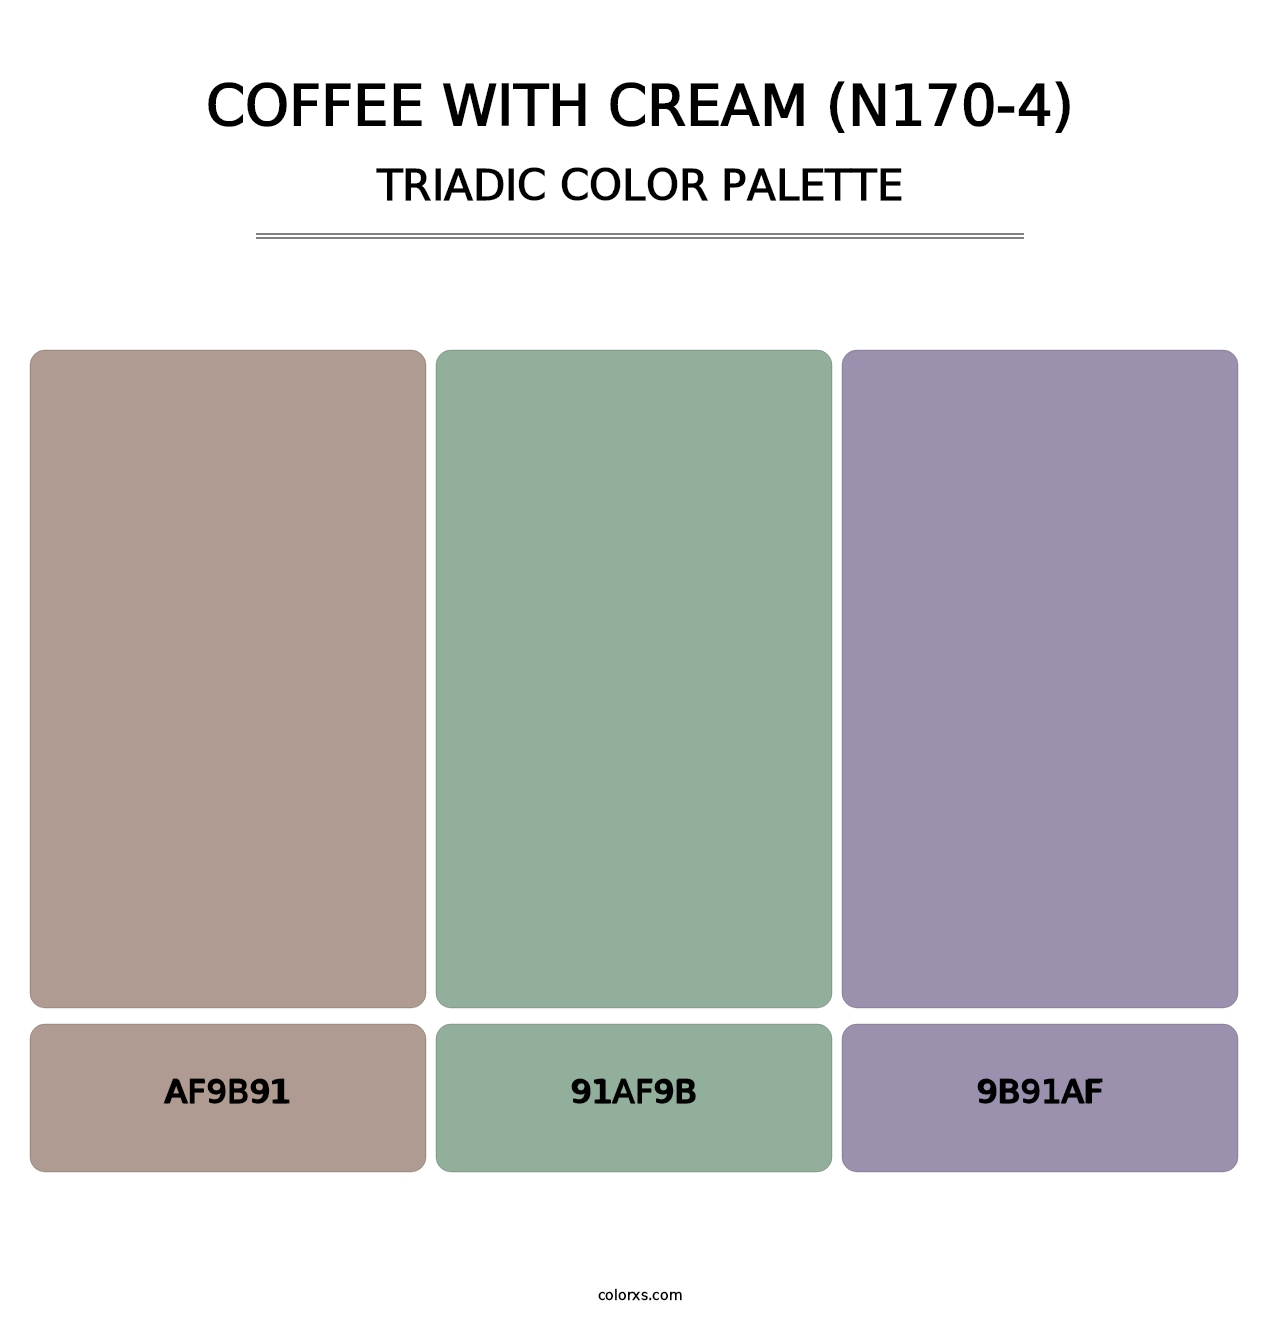 Coffee With Cream (N170-4) - Triadic Color Palette